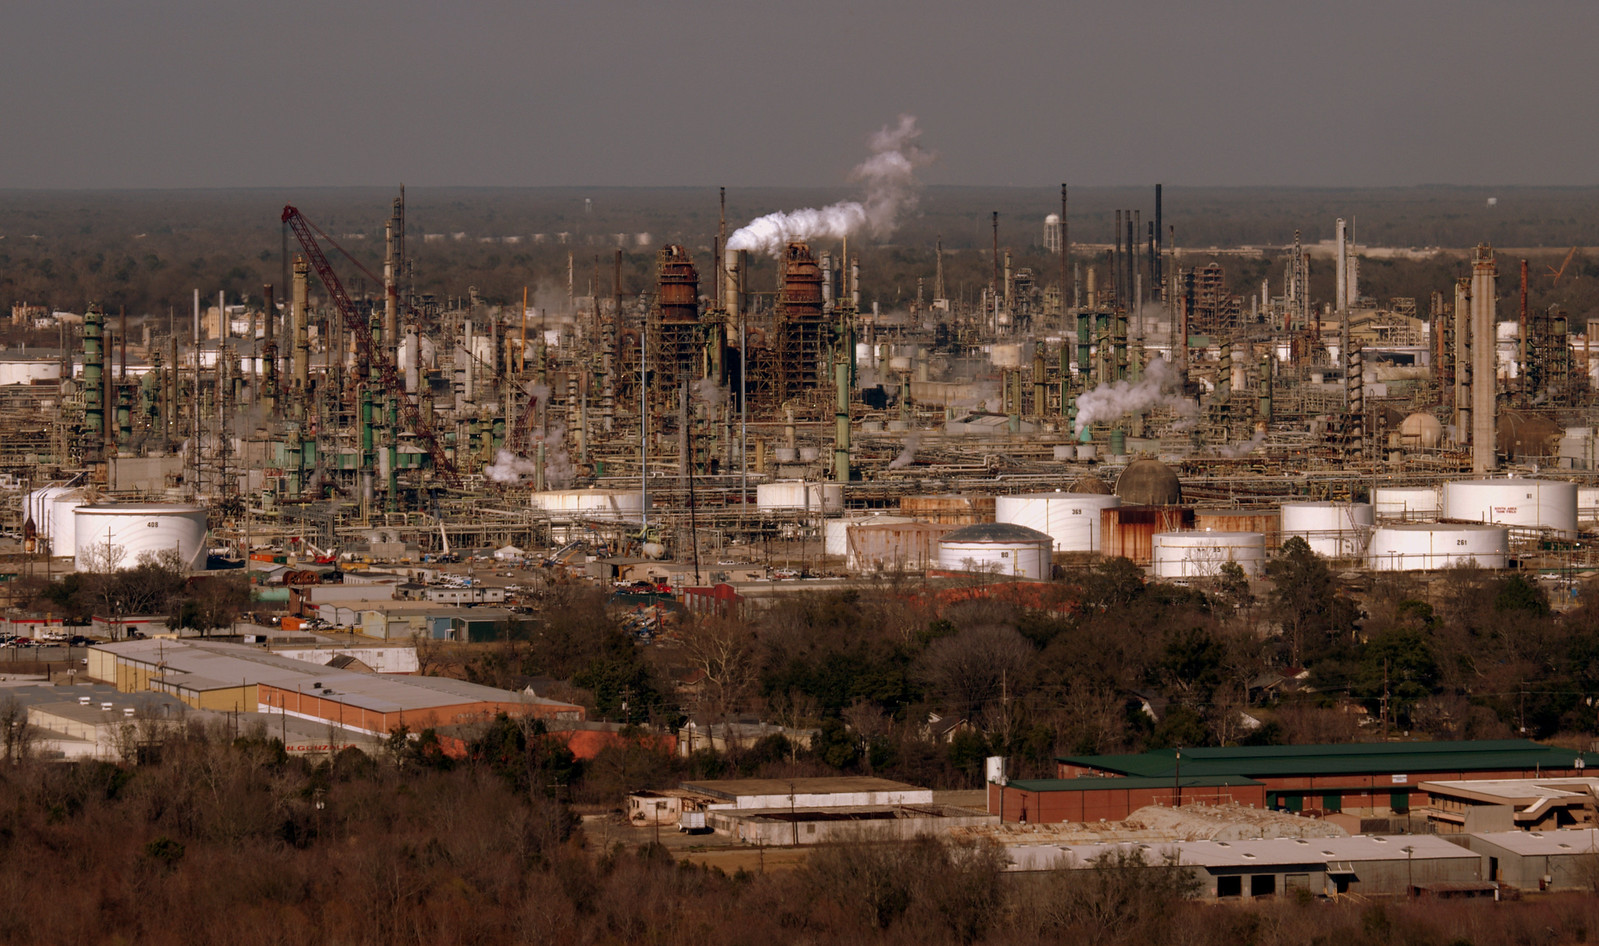 A landscape covered by oil and gas refining infrastructure, such as large holding tanks, smokestacks and a variety of towers.